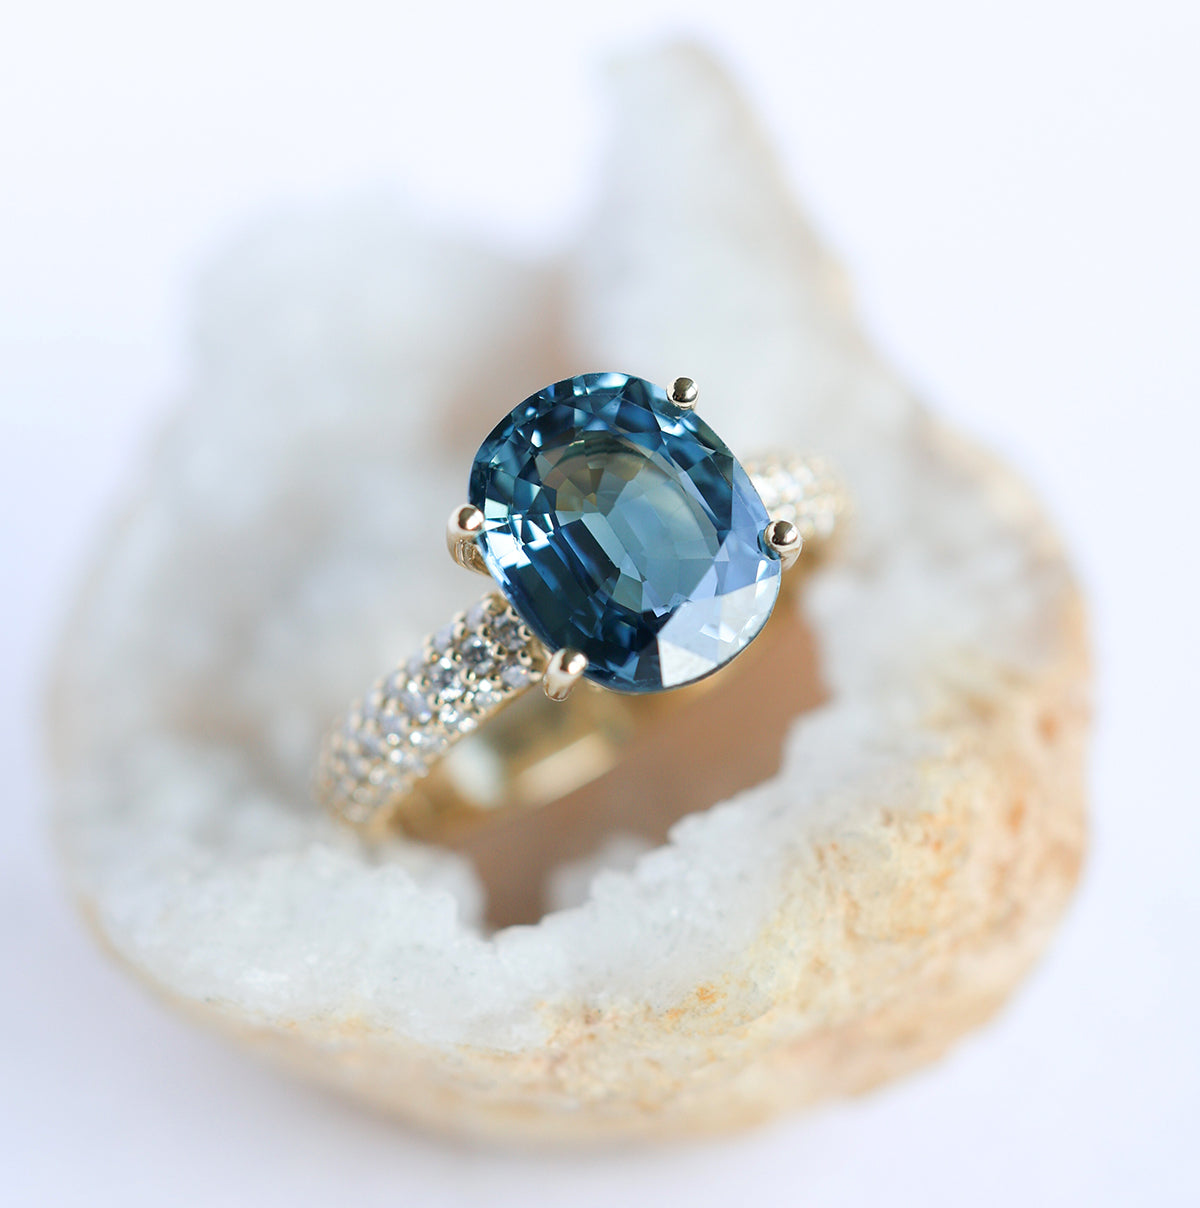 Blue oval-shaped cushion sapphire ring